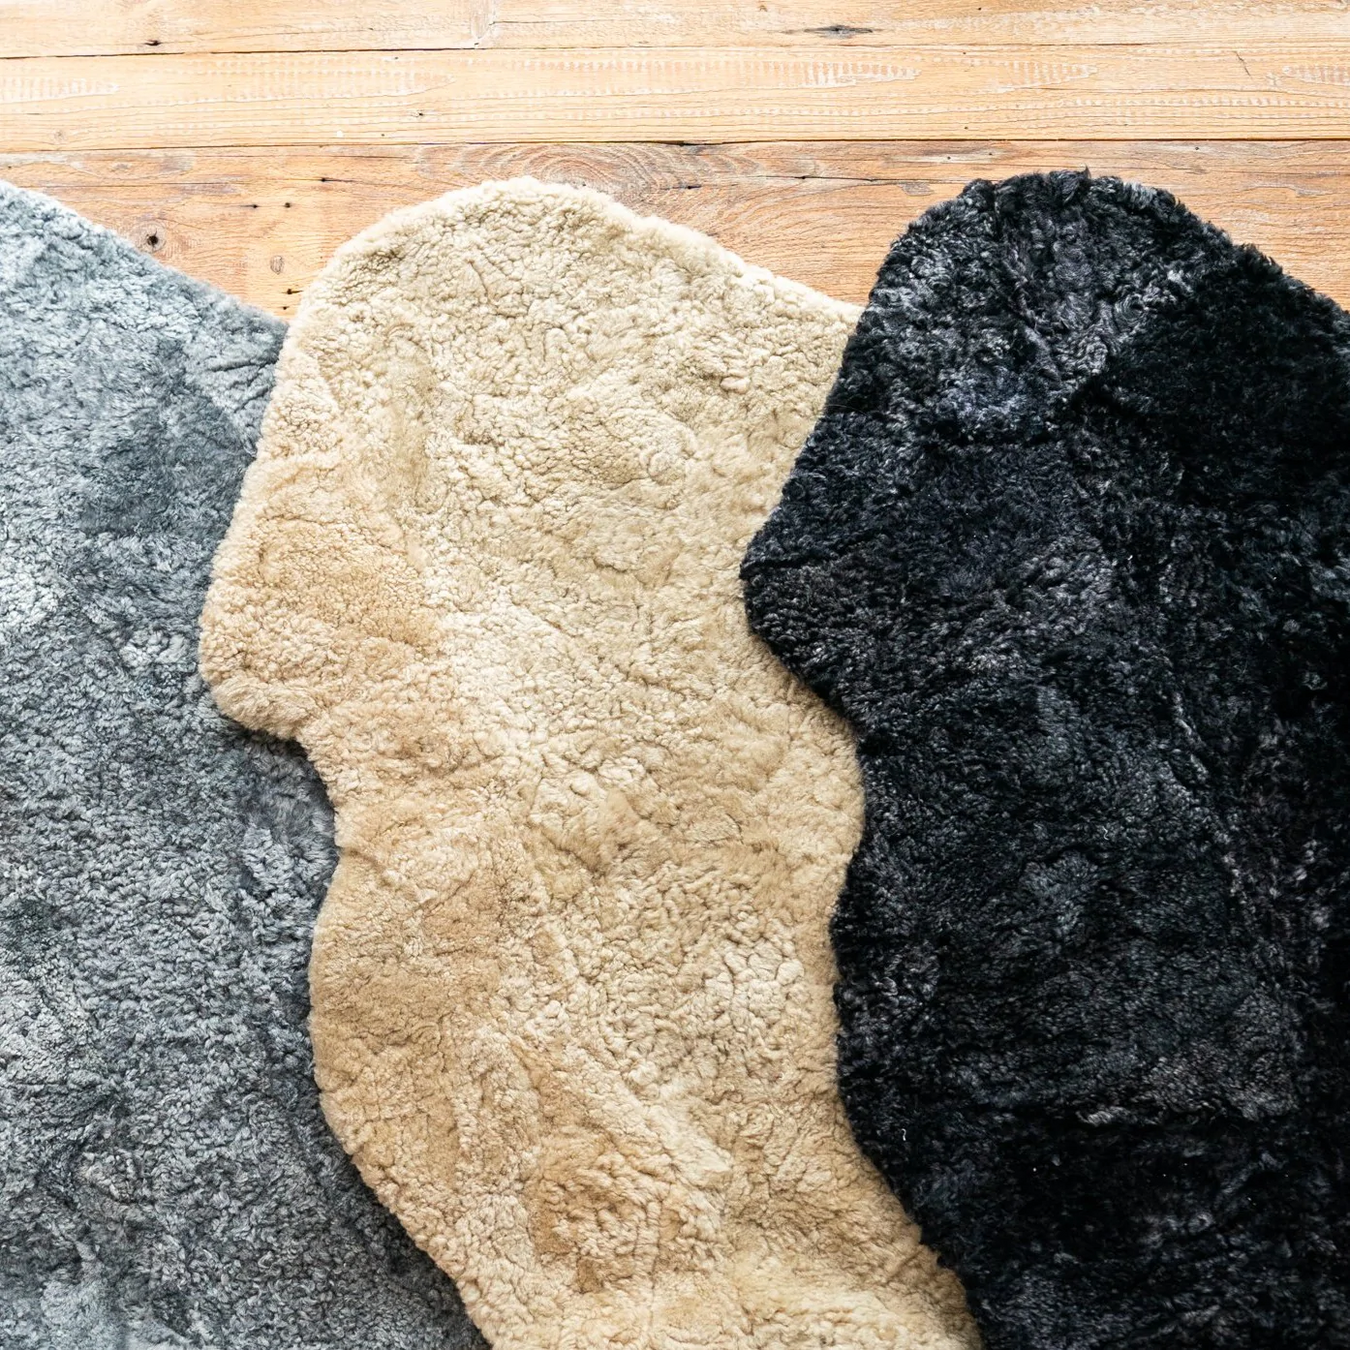 Wasteless sheepskin rugs, features three rugs in Meringo Grey, Oatmeal and Black Smoke staked on top of one another.